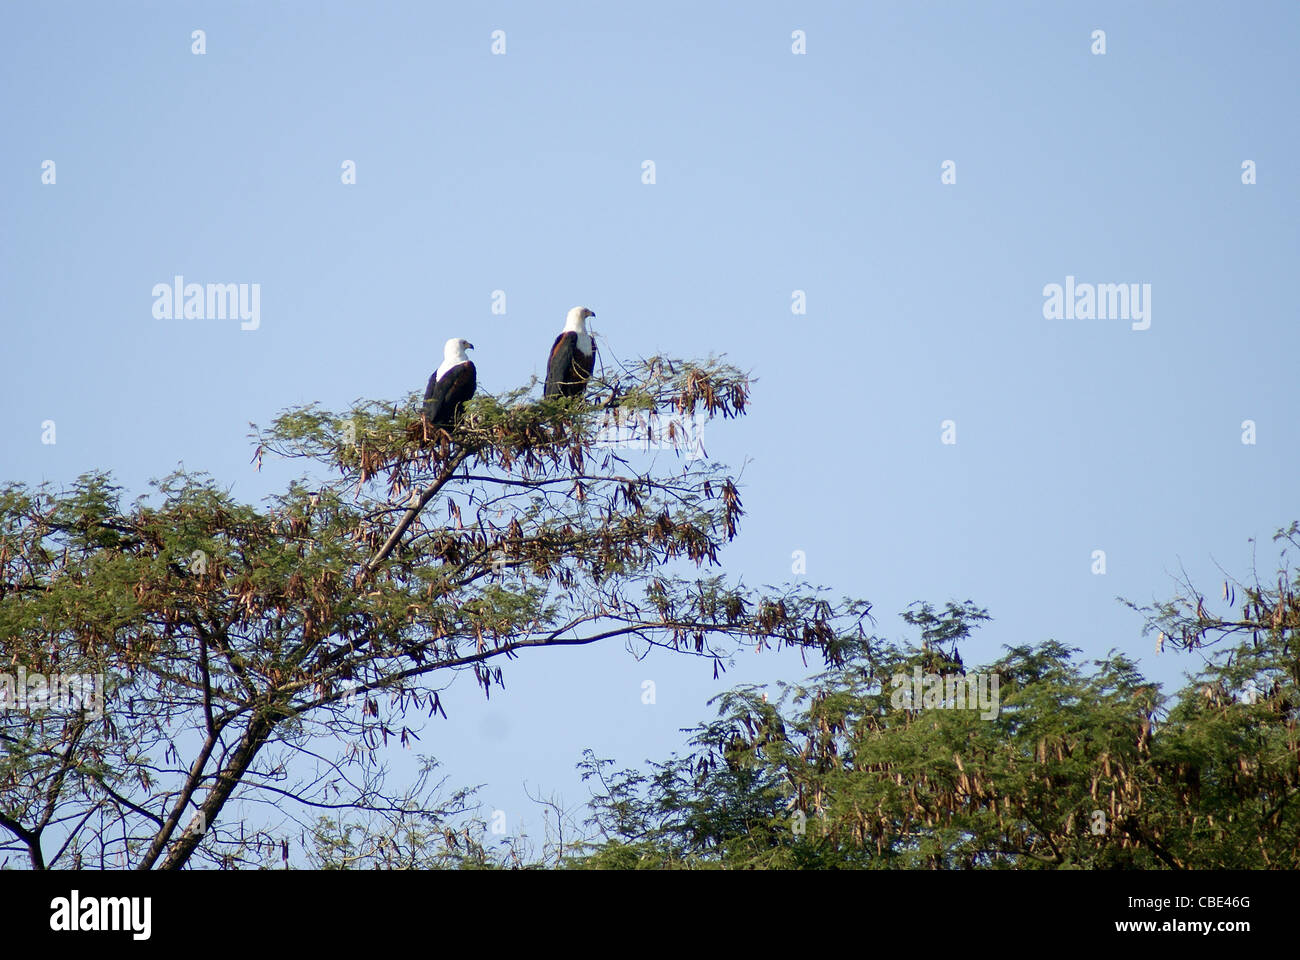 Two African Fish Eagles (Haliaeetus vocifer) on a tree. Photographed in Ethiopia Stock Photo